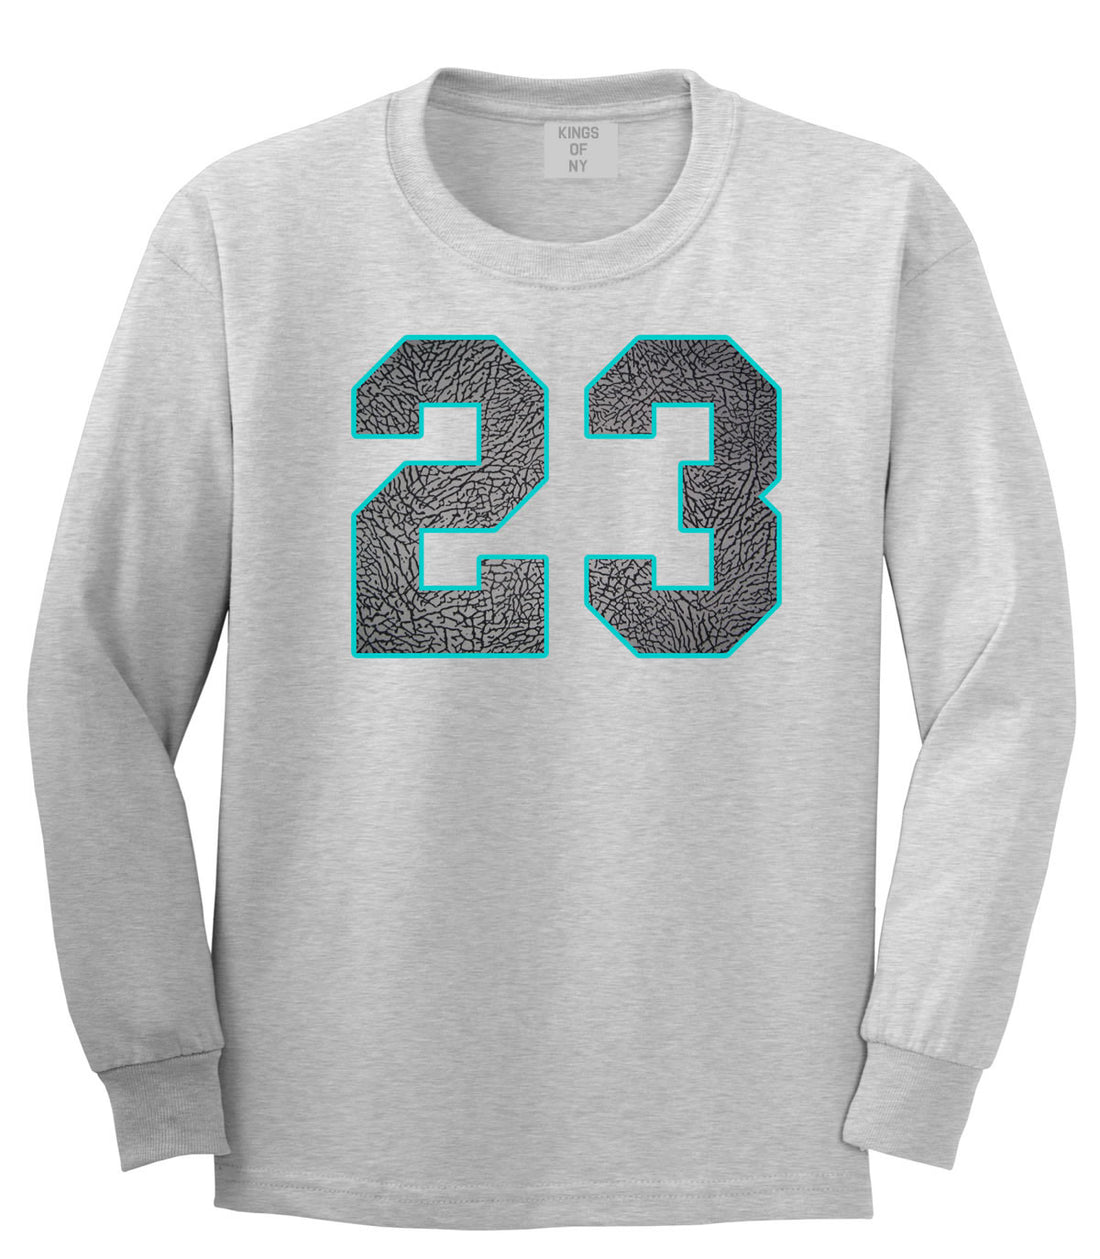 23 Cement Blue Jersey Long Sleeve T-Shirt in Grey By Kings Of NY